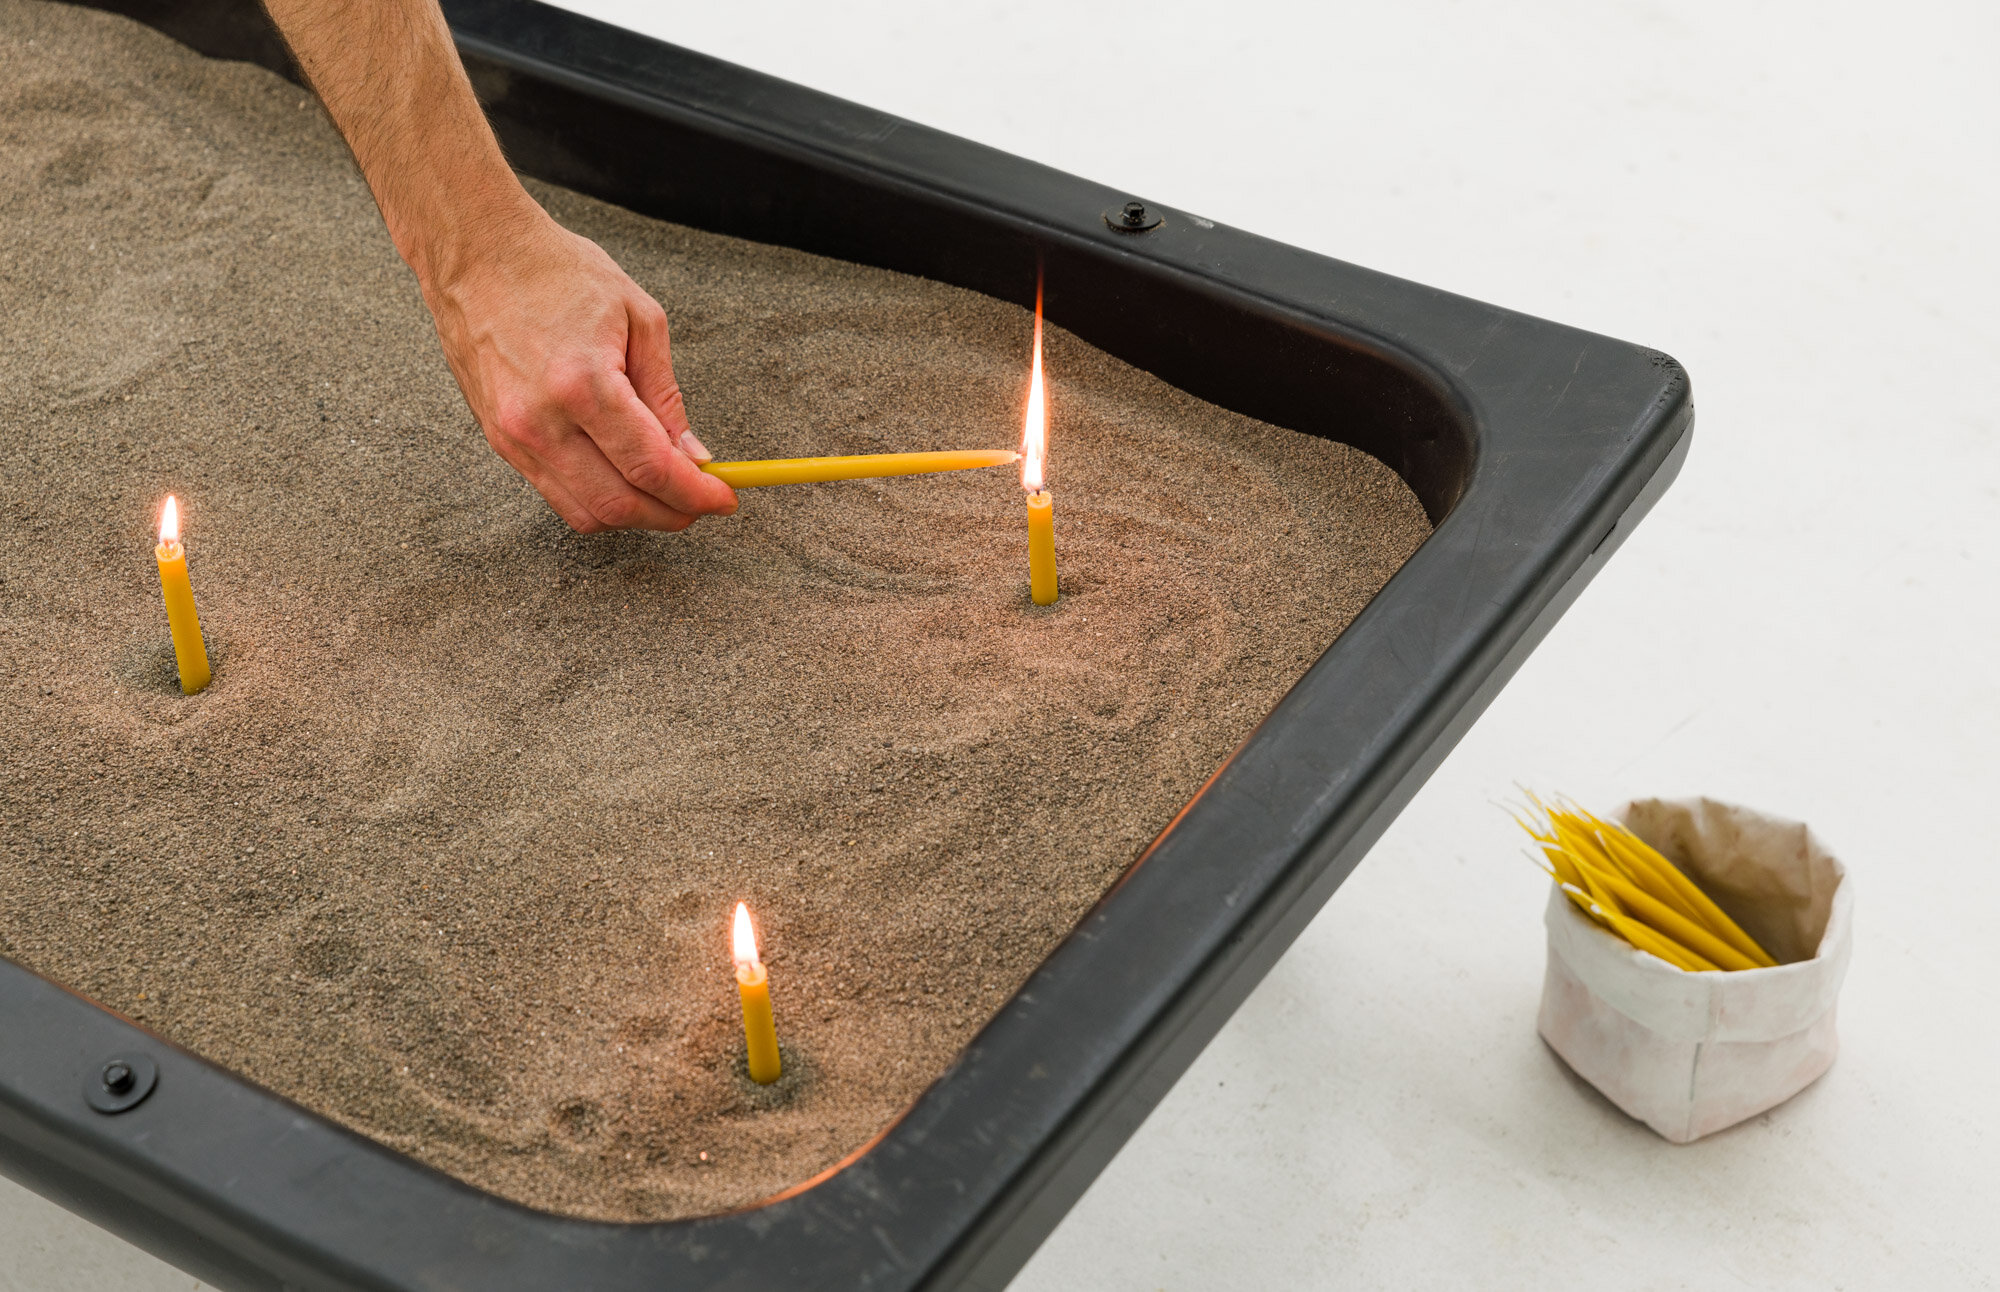  Kalaija Mallery,  Divination Trough ​, powder-coated livestock feeding trough, sand, hand-dipped beeswax candles, 5’ x 36” 